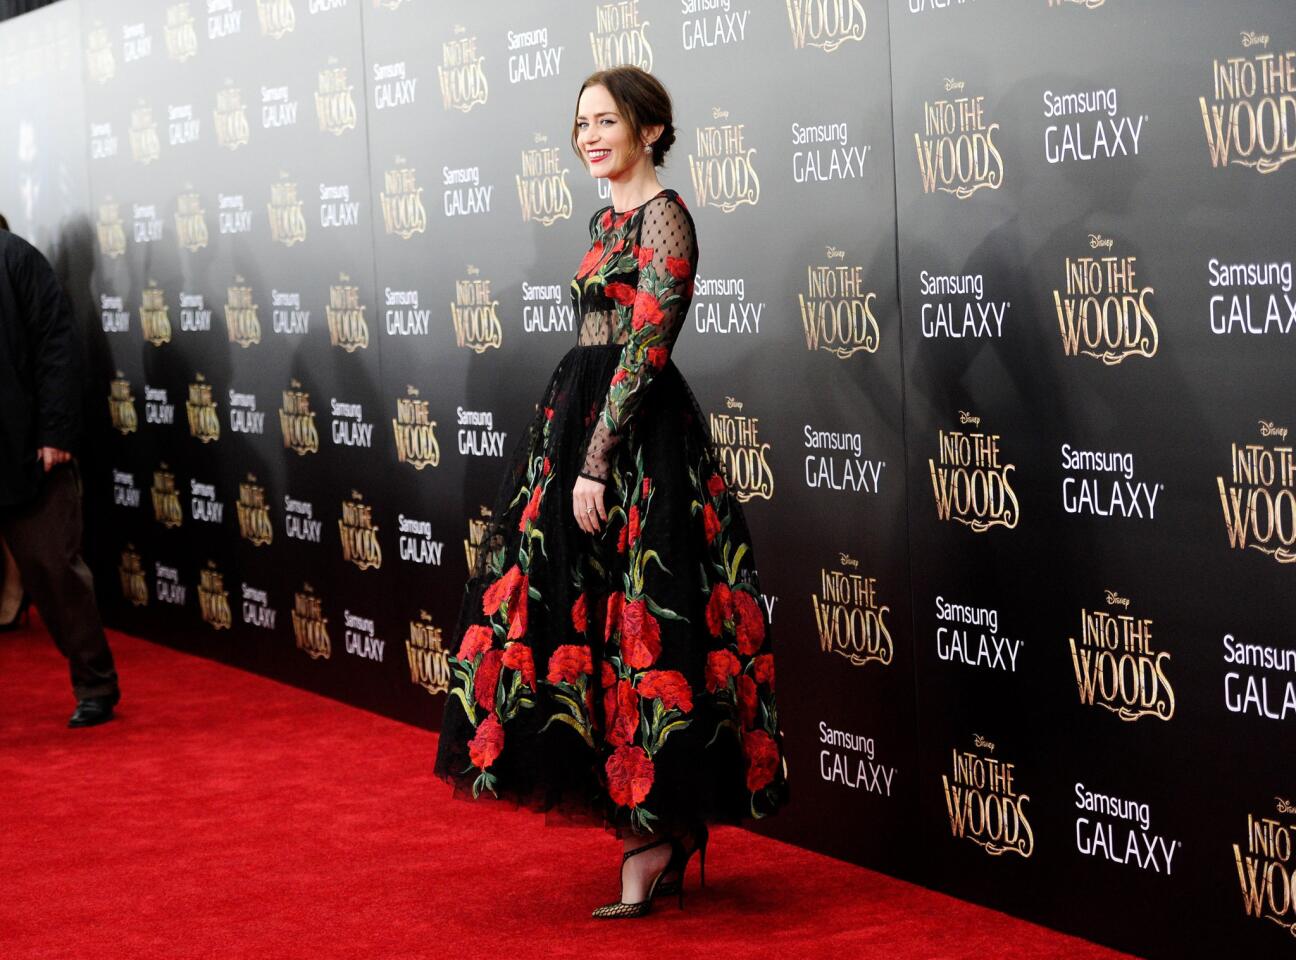 'Into the Woods' world premiere